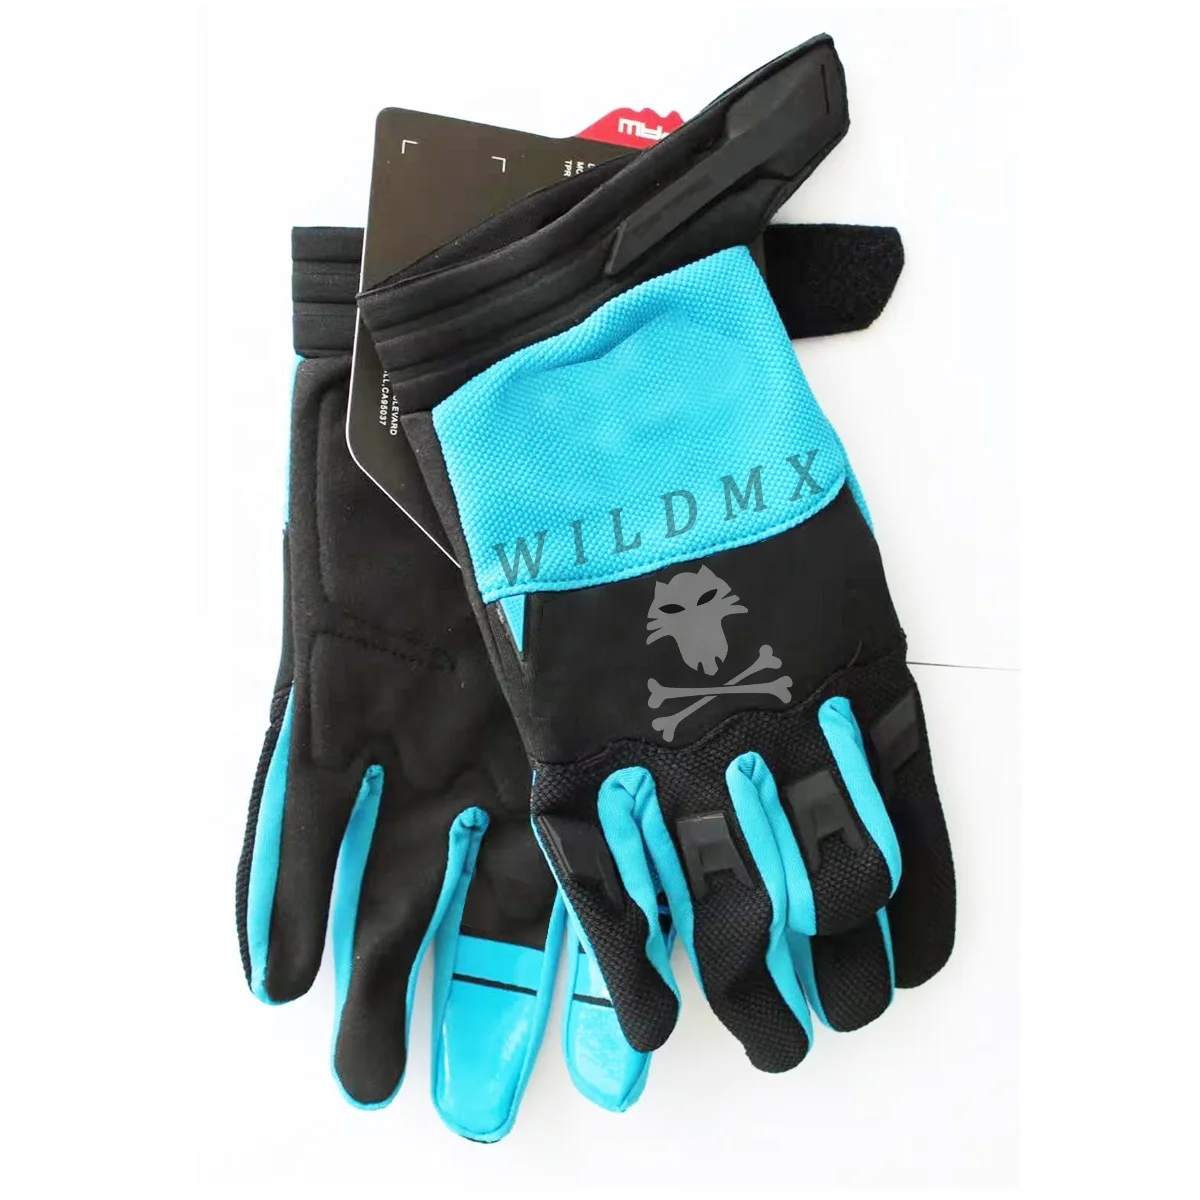 

Wildmx Motocross Racing Gloves Mens Off-road MX MTB DH Mountain Bike Downhill Cycling Bicycle Guantes Enduro Trail Glove, Custom color